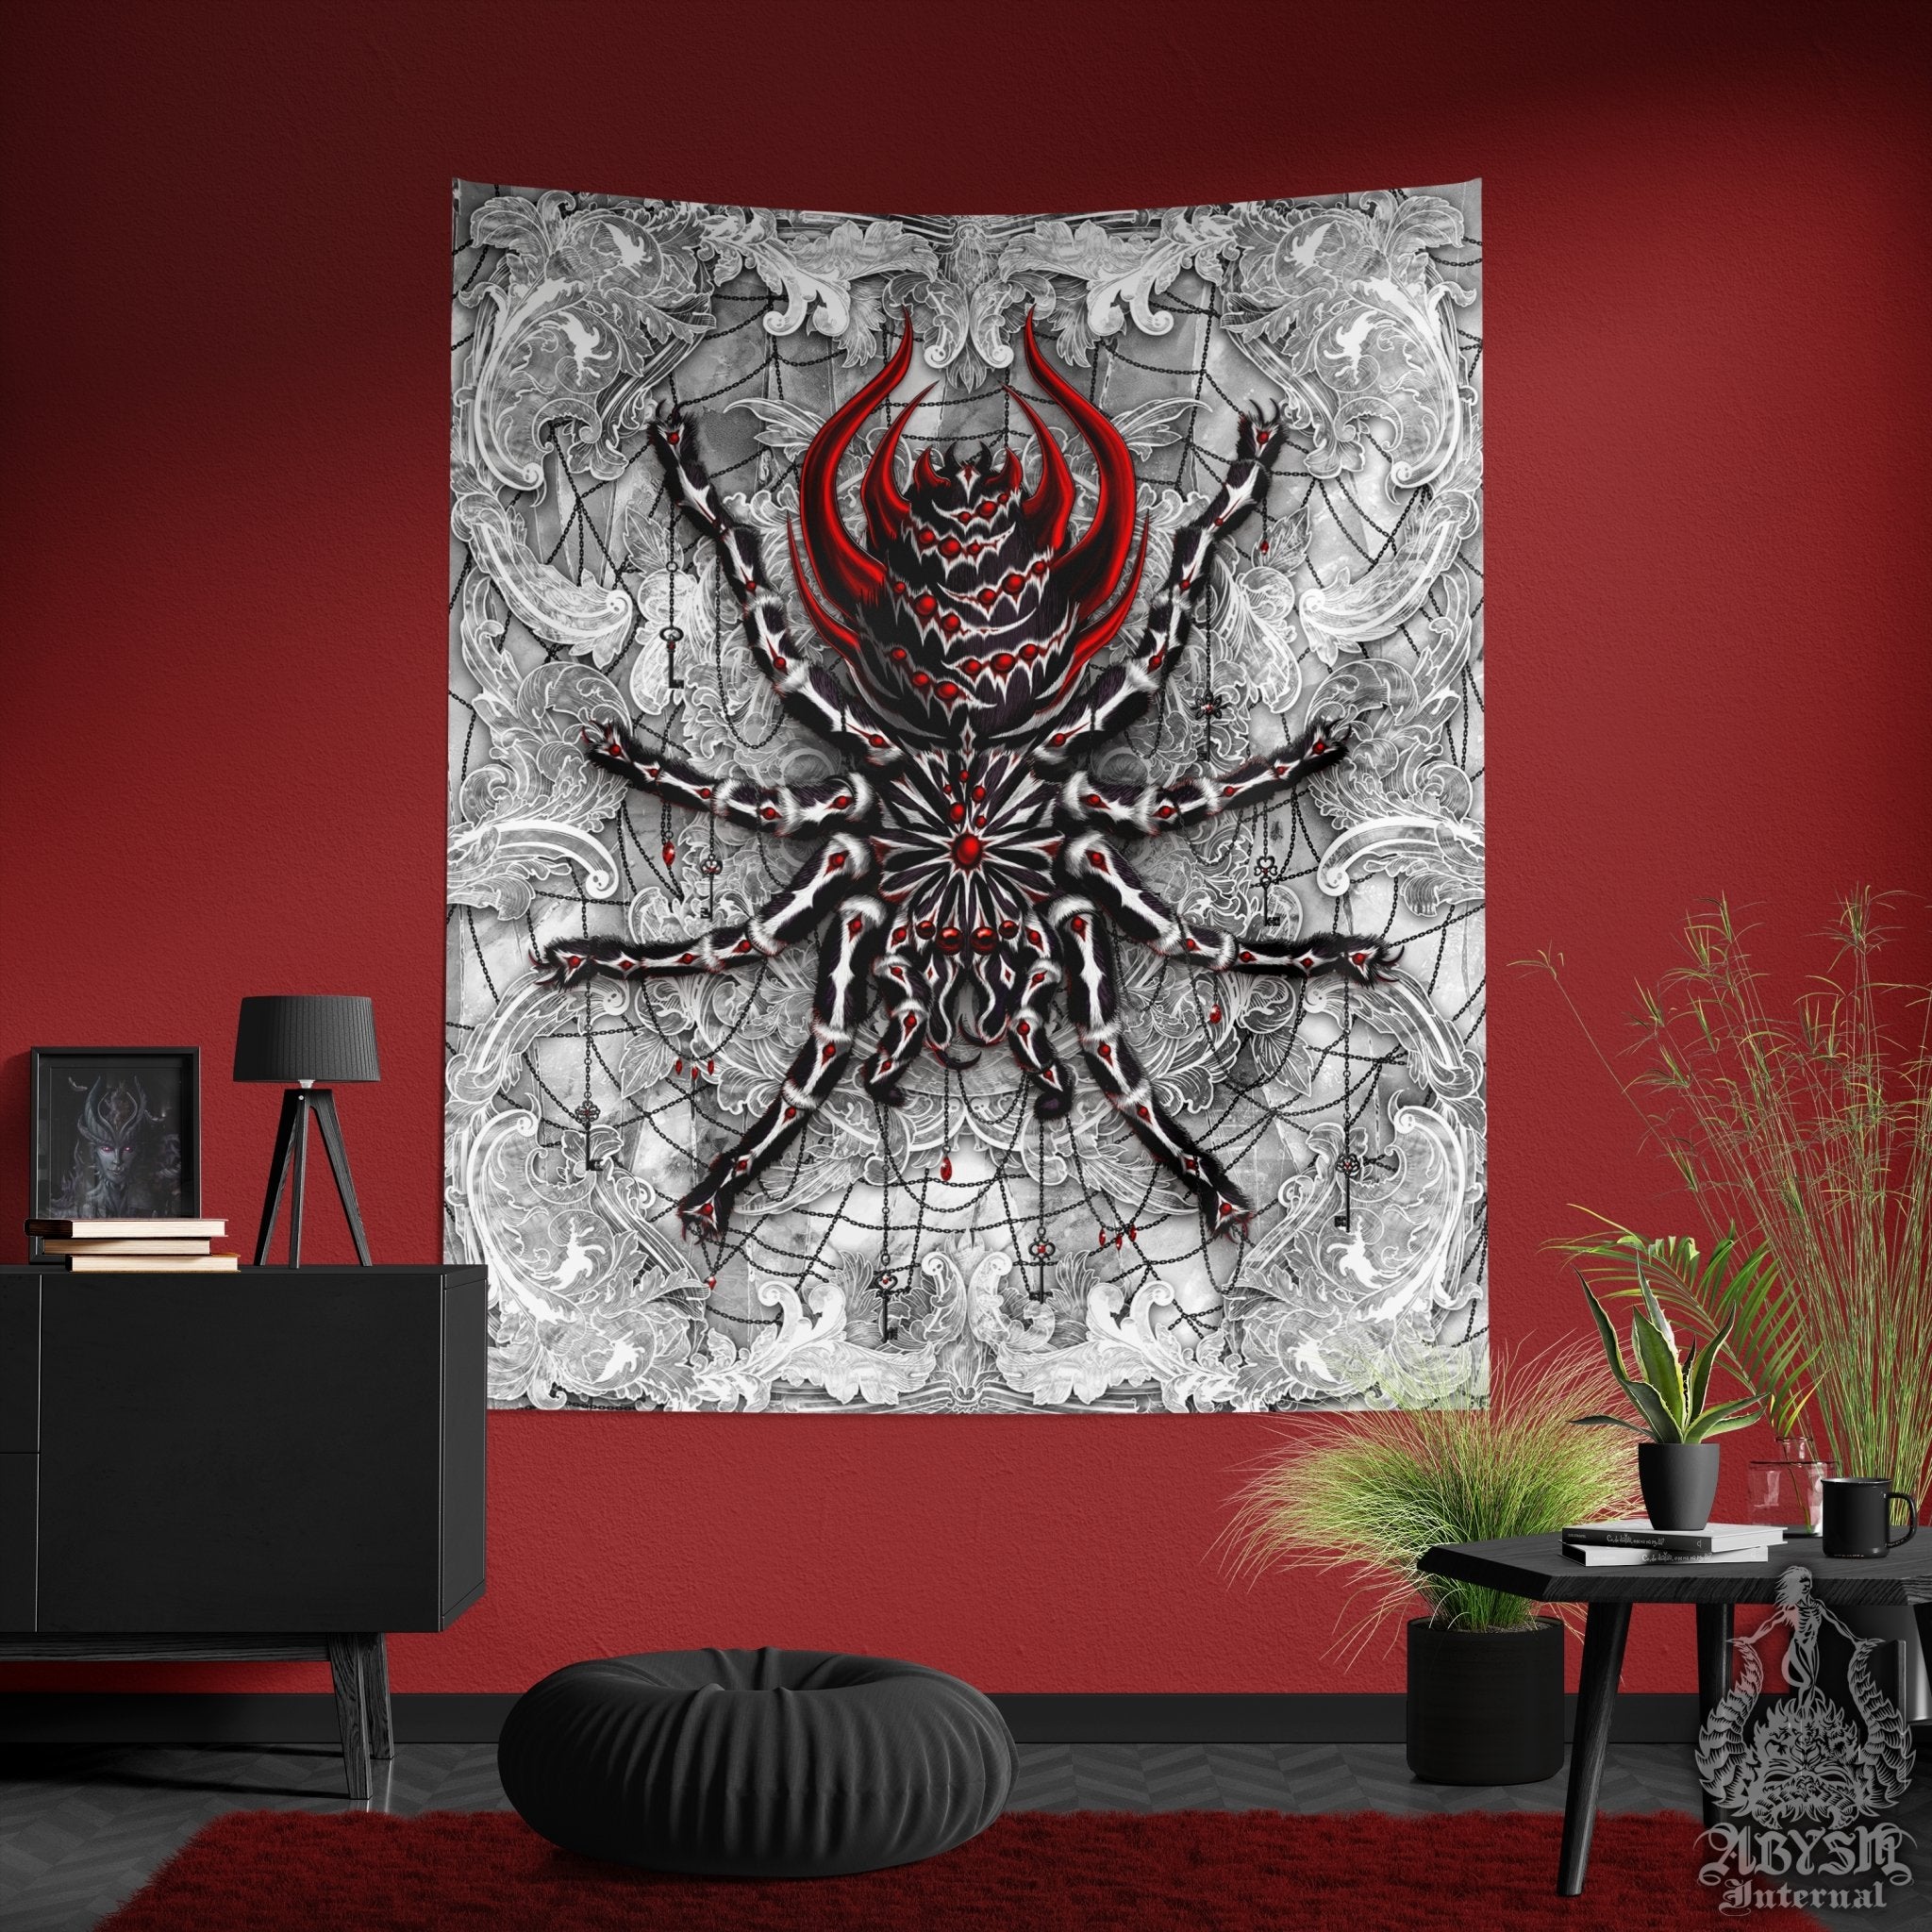 Spider Tapestry, White Goth Wall Hanging, Gothic Home Decor, Tarantula Art Print - Stone Red - Abysm Internal